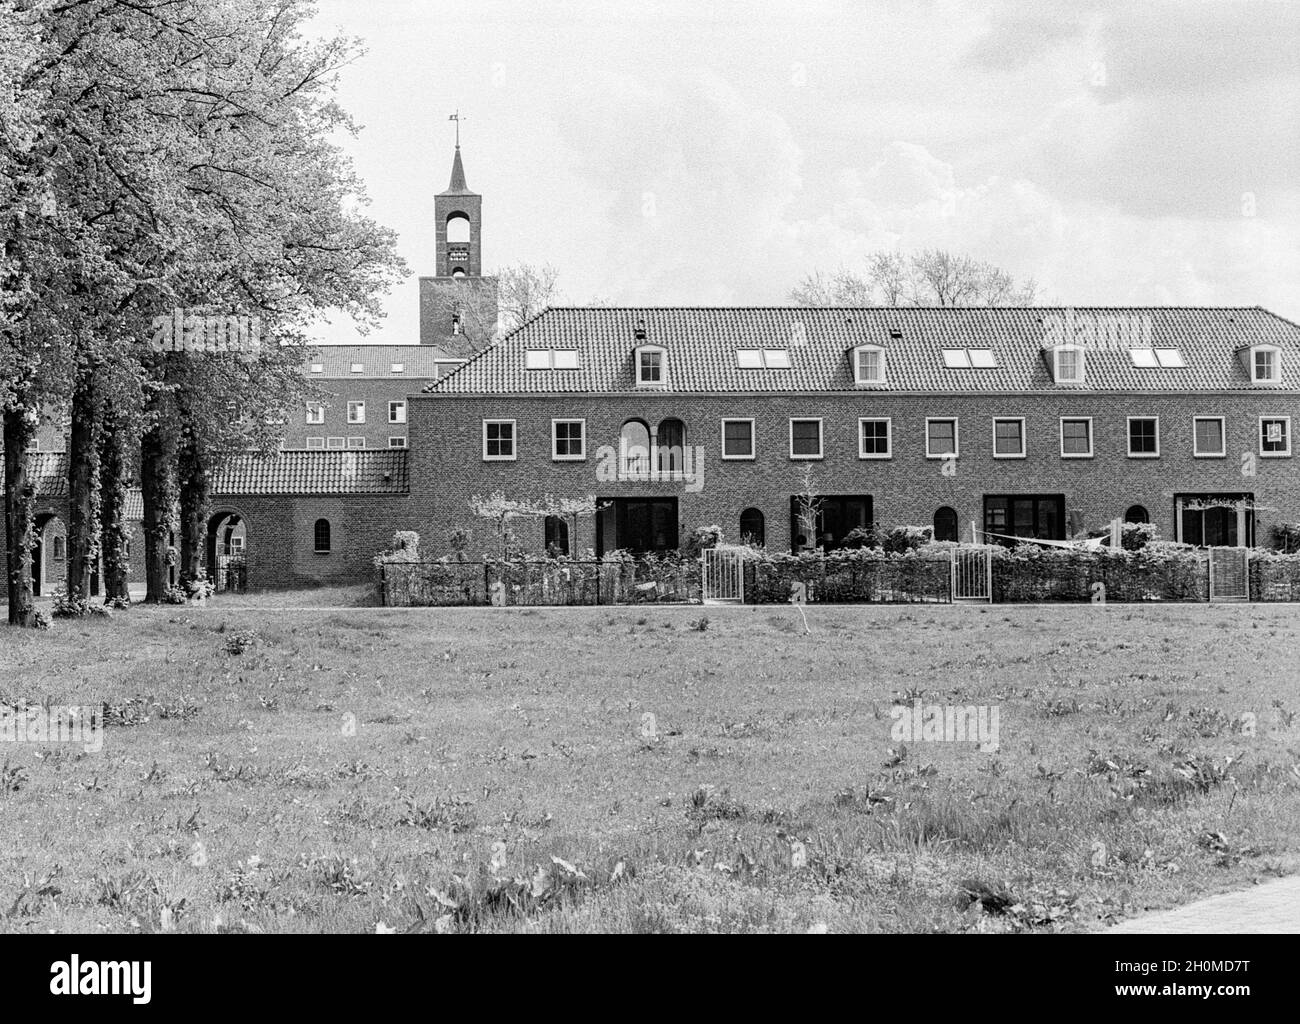 Breda, Netherlands. Fading Memories Series. Estate The Klokkenberg, a former sanatorium build during the 1930's, now being converted into luxurious houses and apartments. Stock Photo